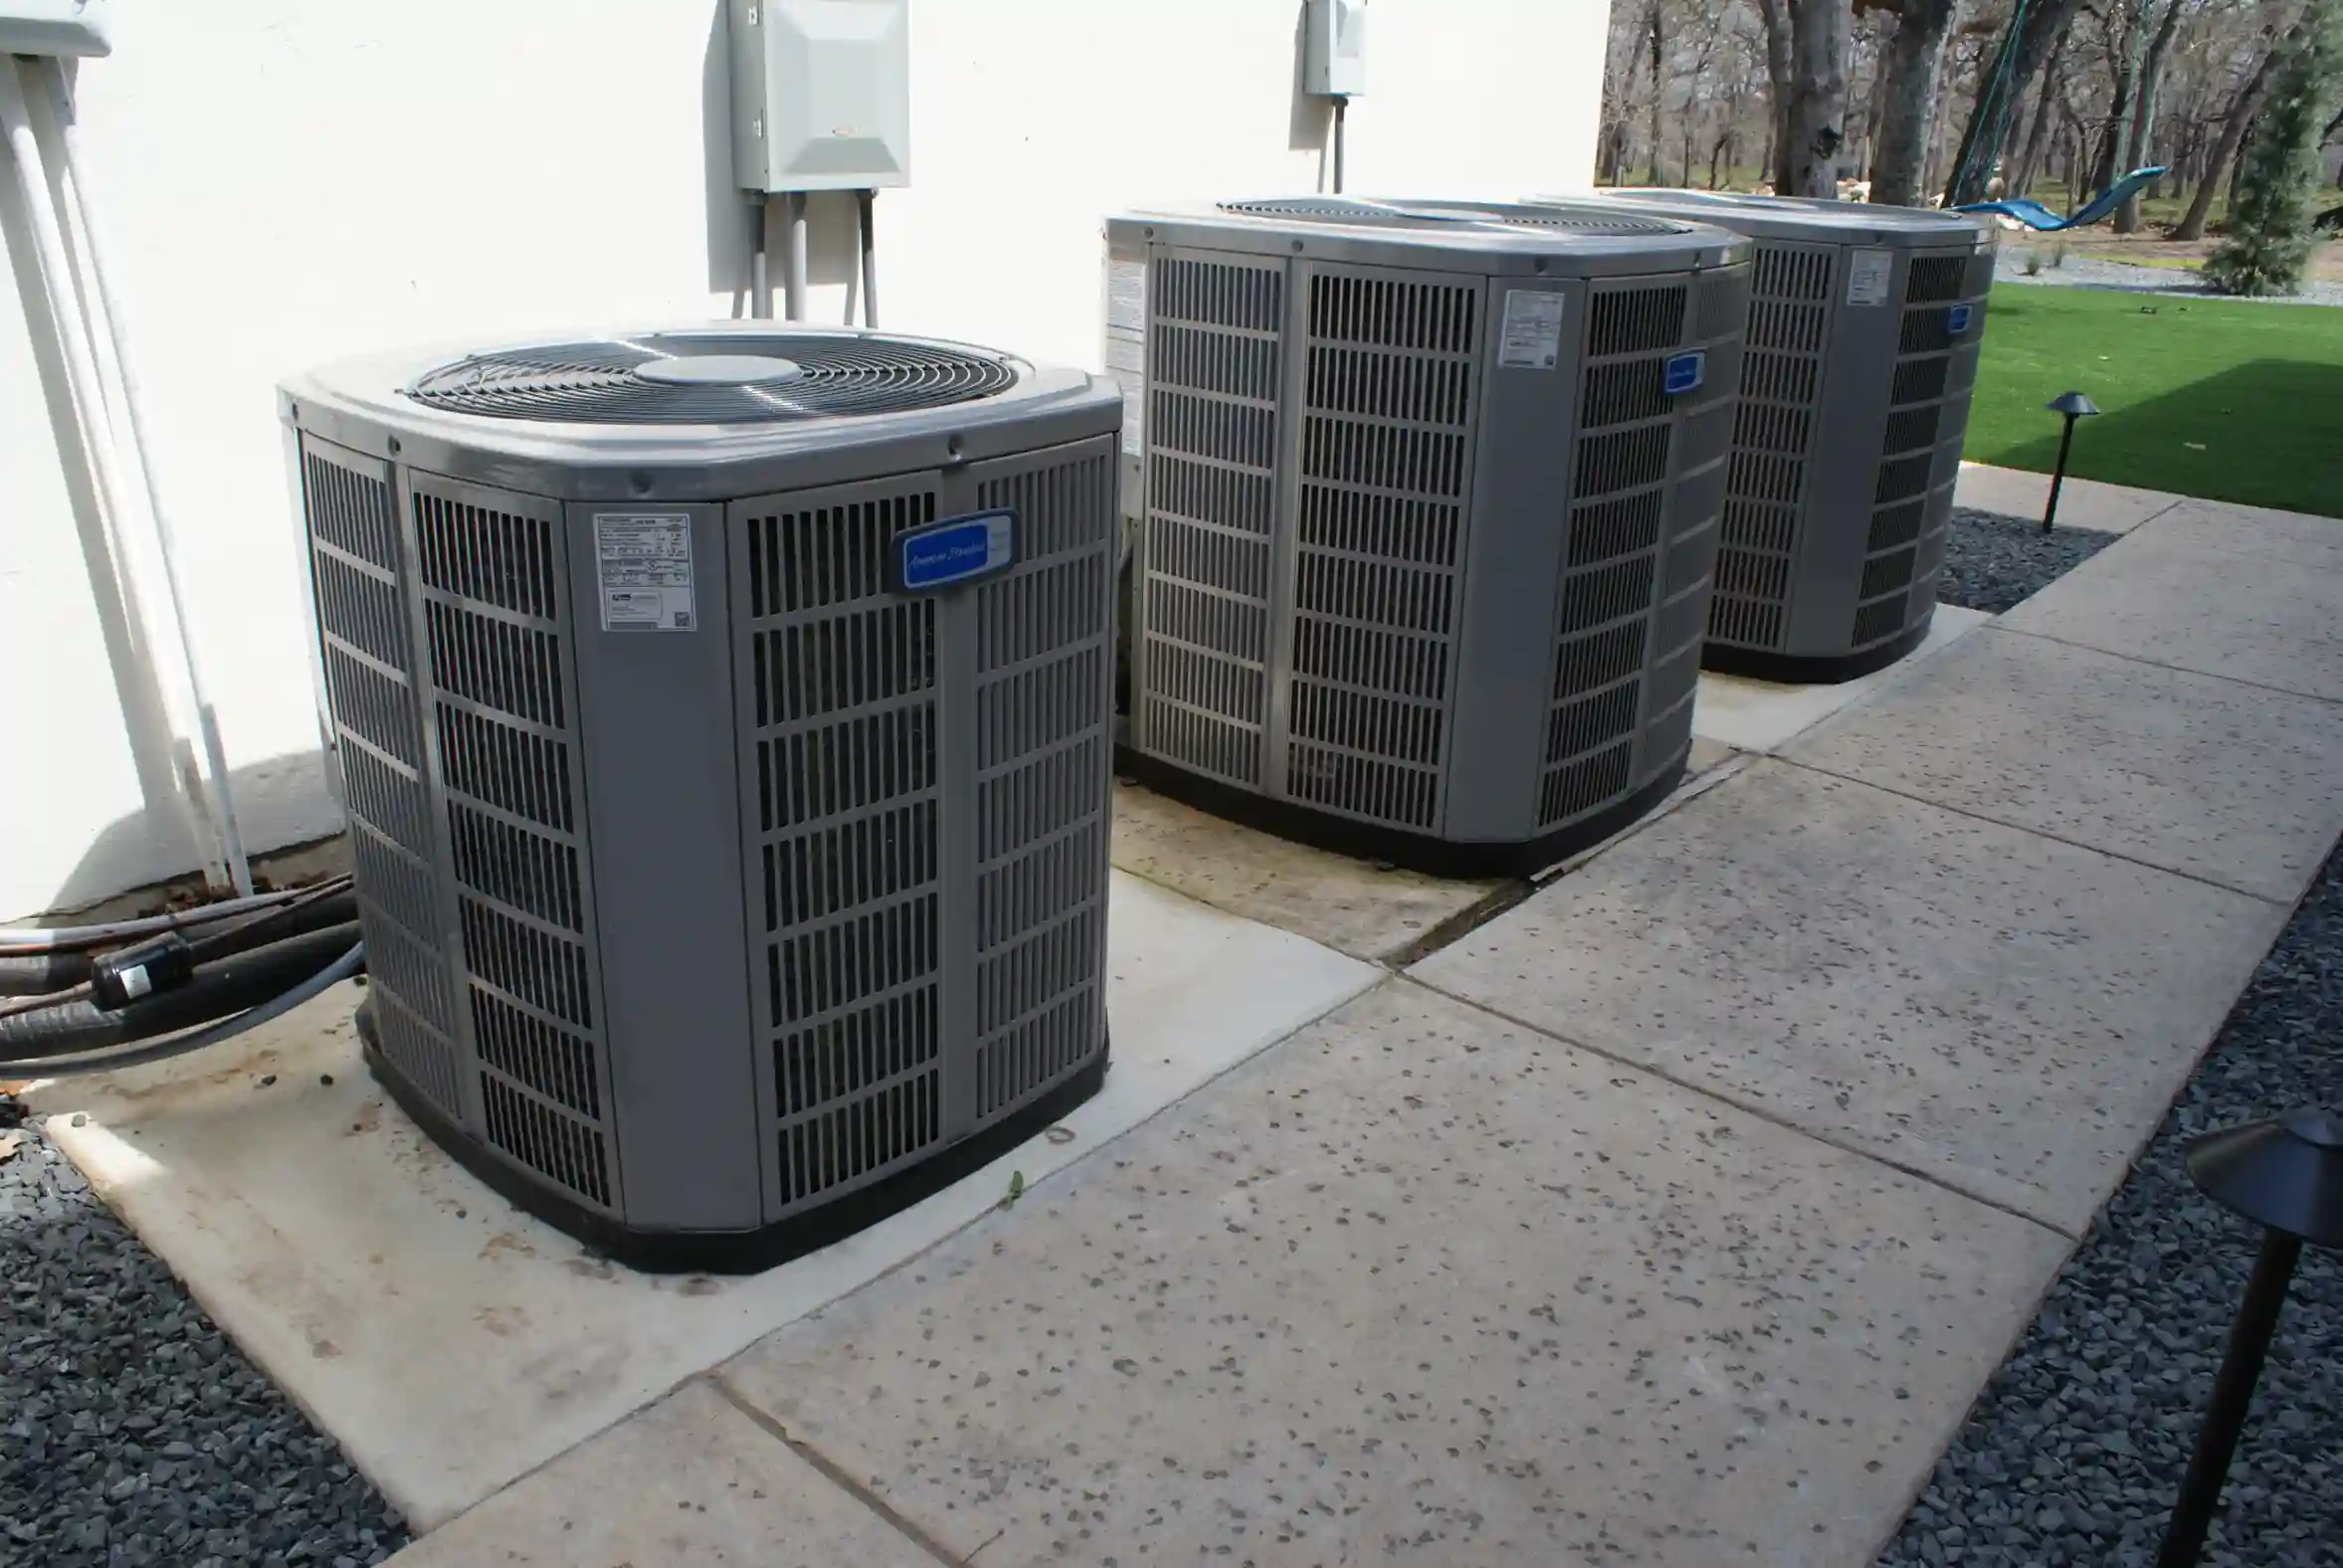 Commercial services available. Three large outdoor air conditioning units are installed side by side on concrete pads